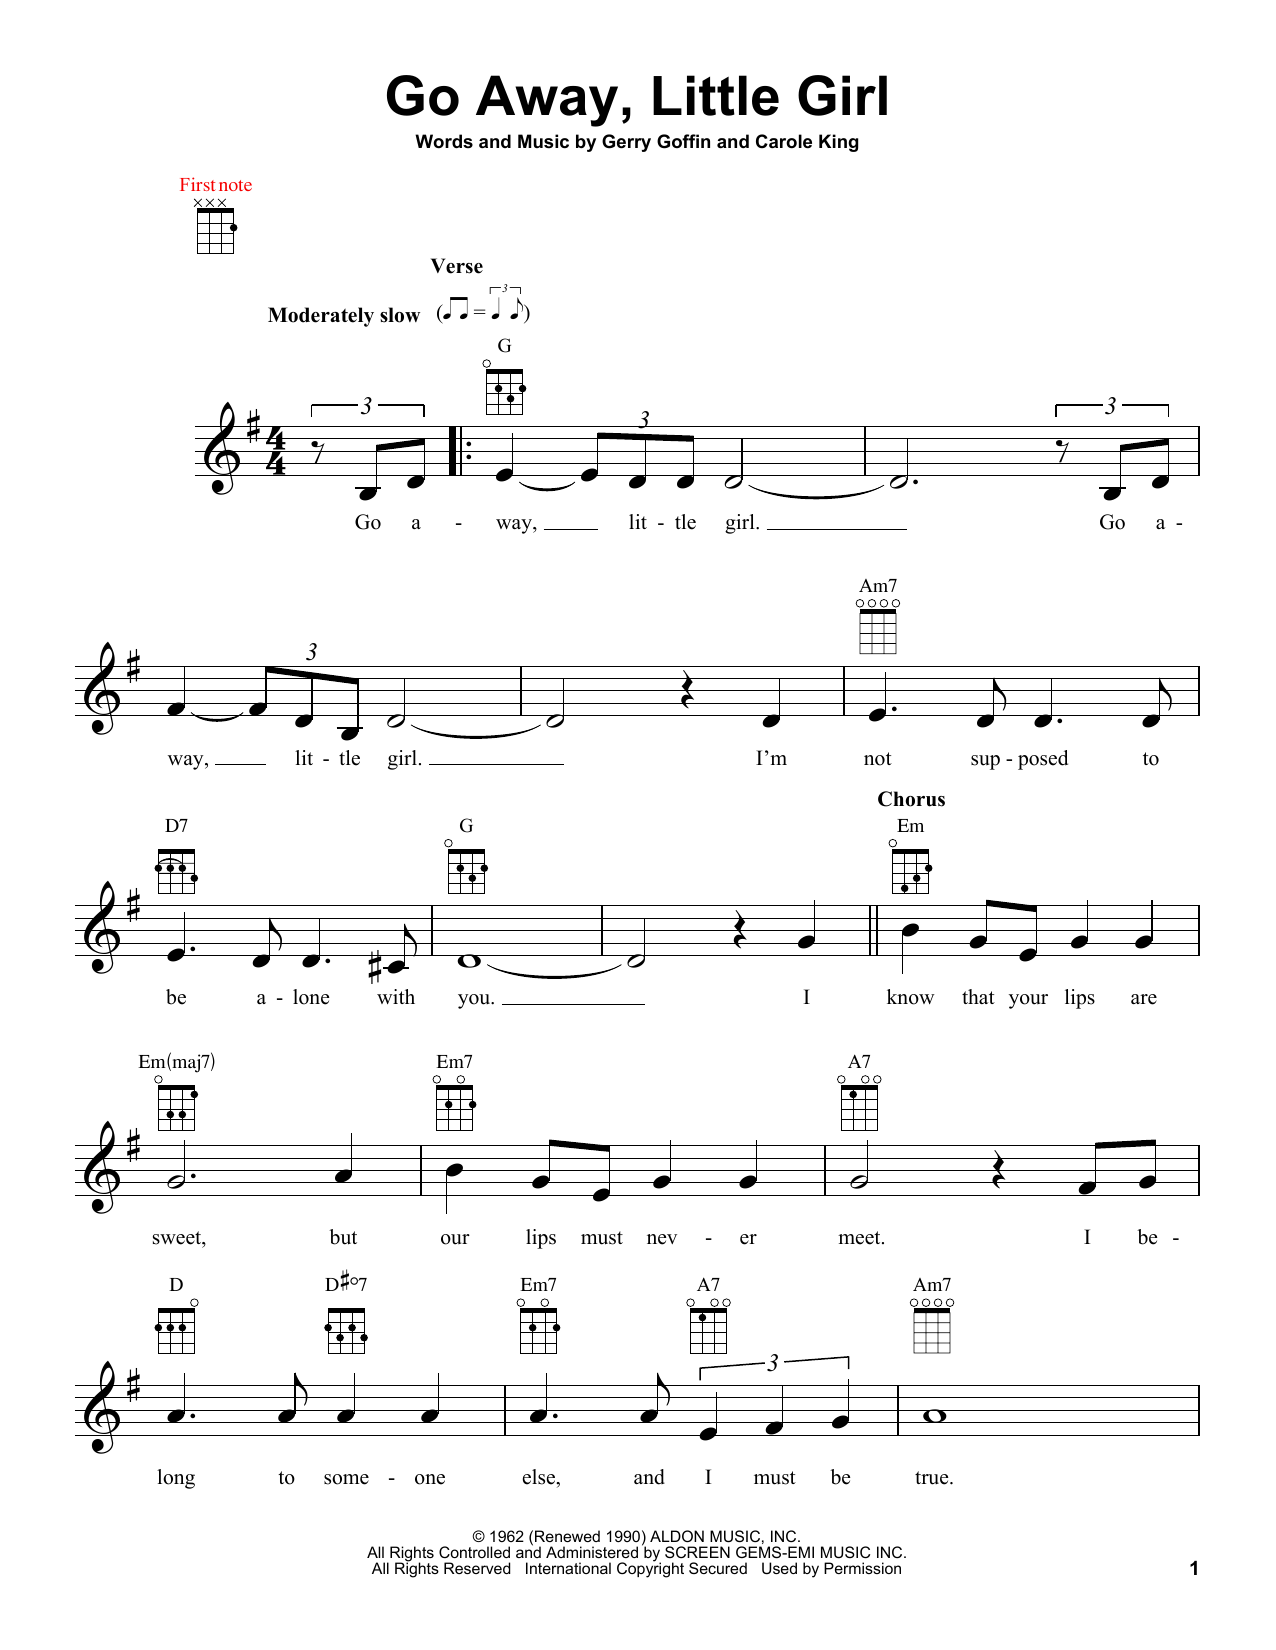 Donny Osmond Go Away, Little Girl sheet music notes and chords. Download Printable PDF.